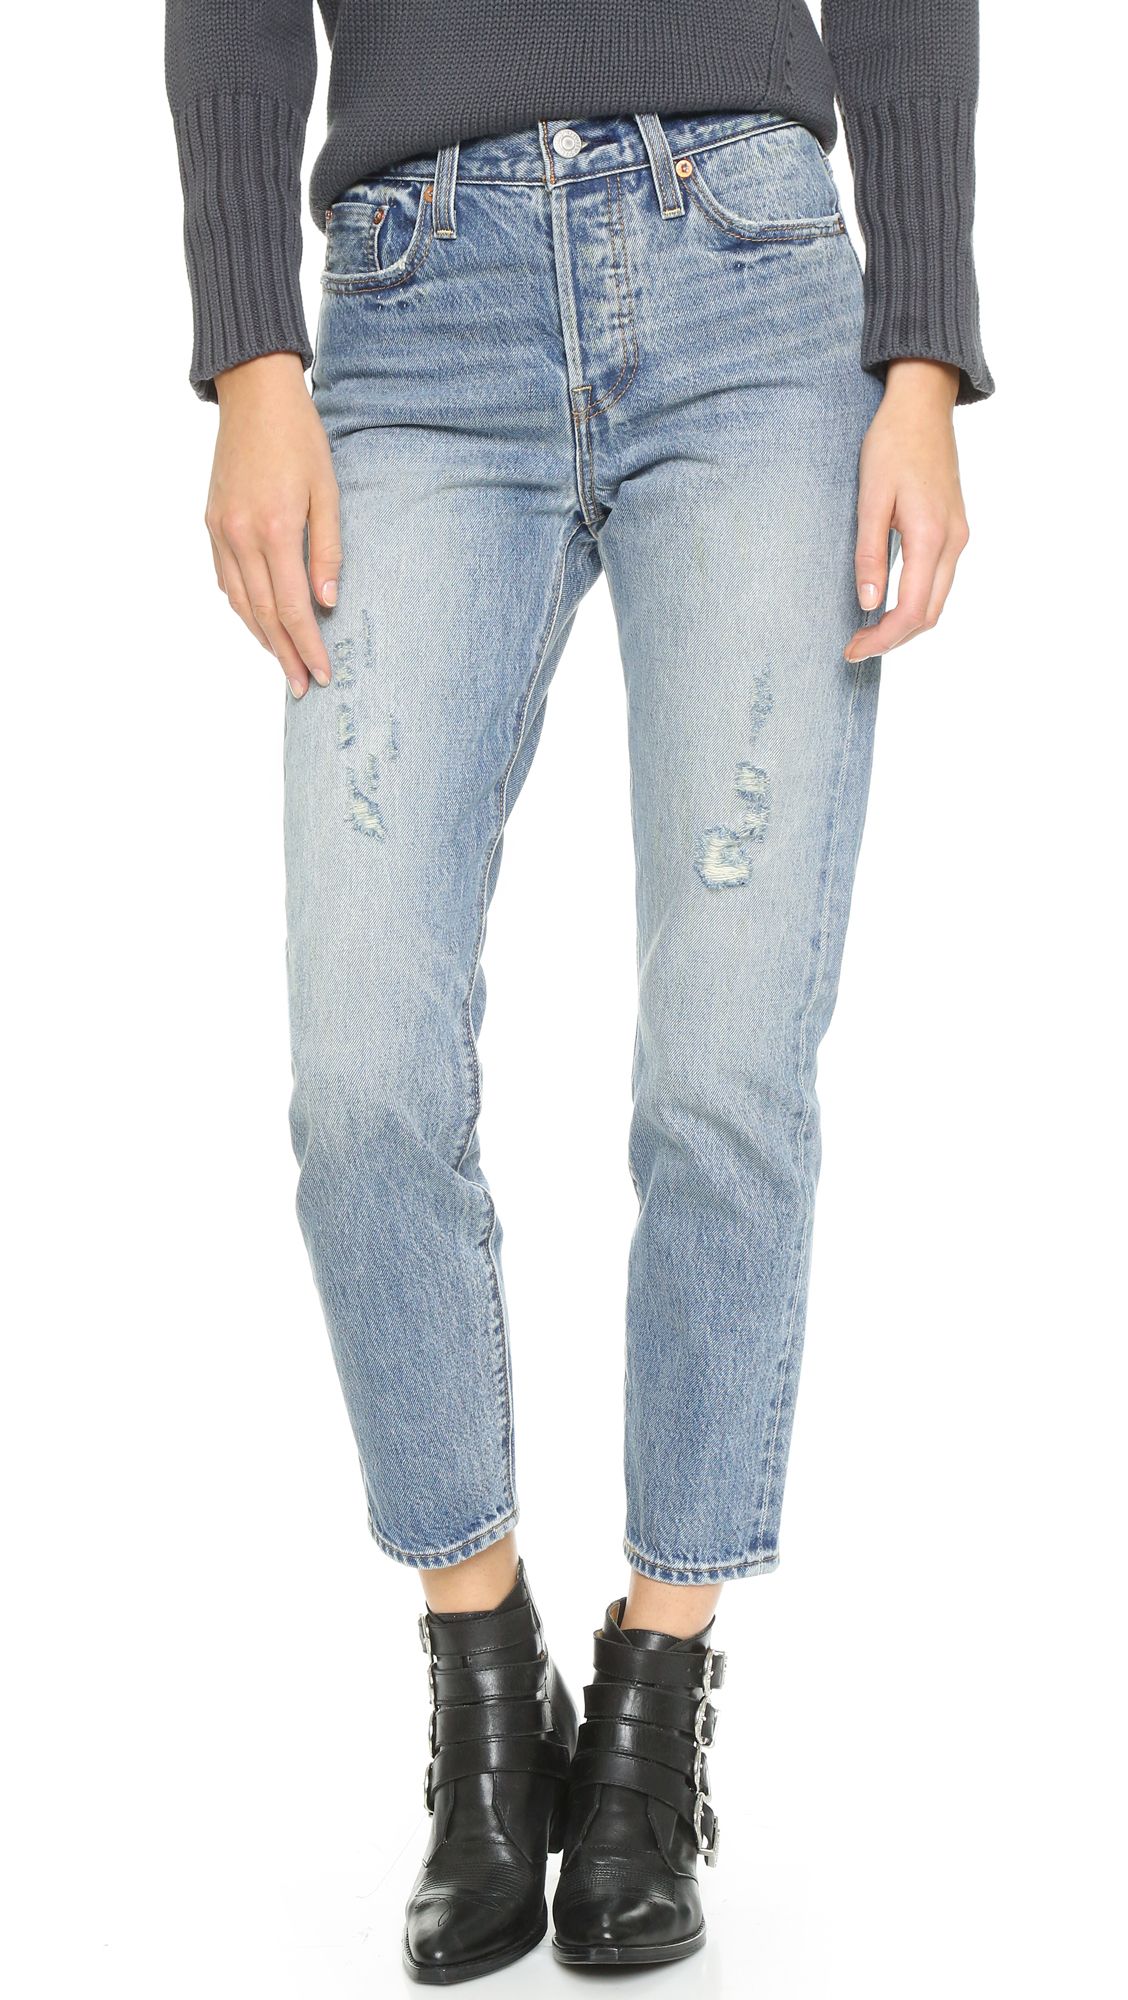 Levi'S Wedgie Icon Jeans - Foothills | Shopbop